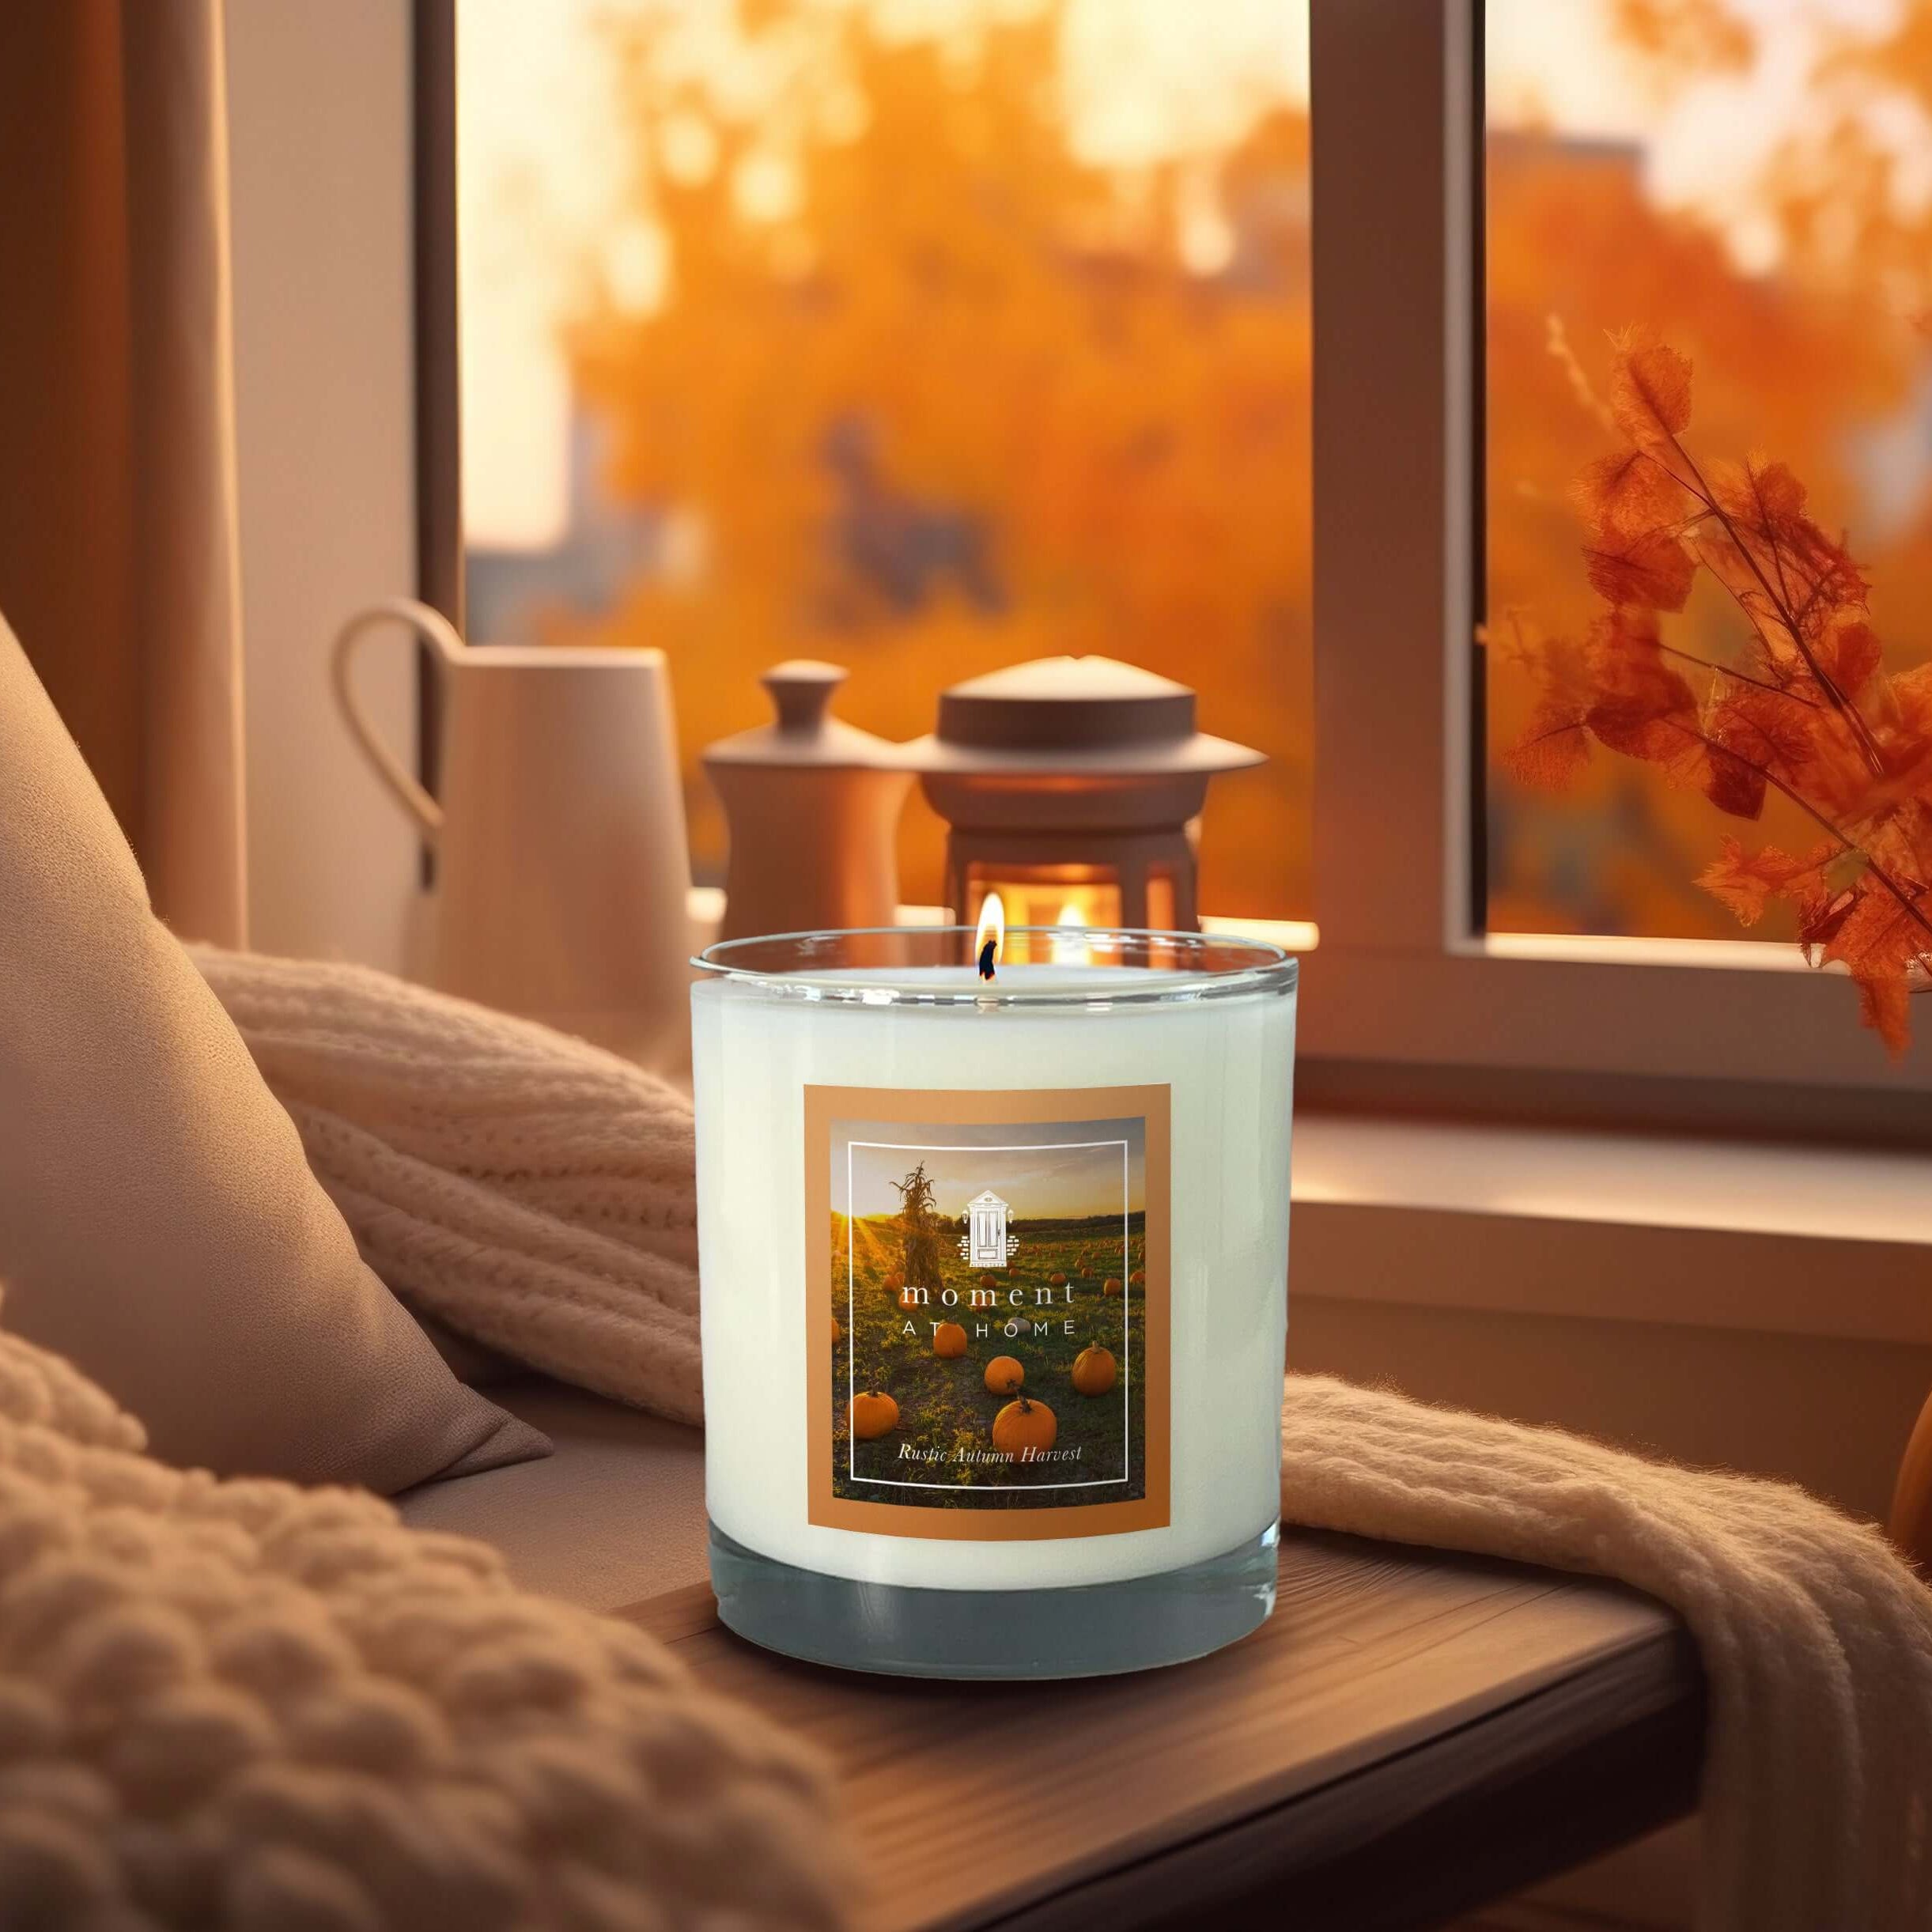 Autumn Scented Candle. Pumpkin Spice. Apple Harvest. Fall smells.